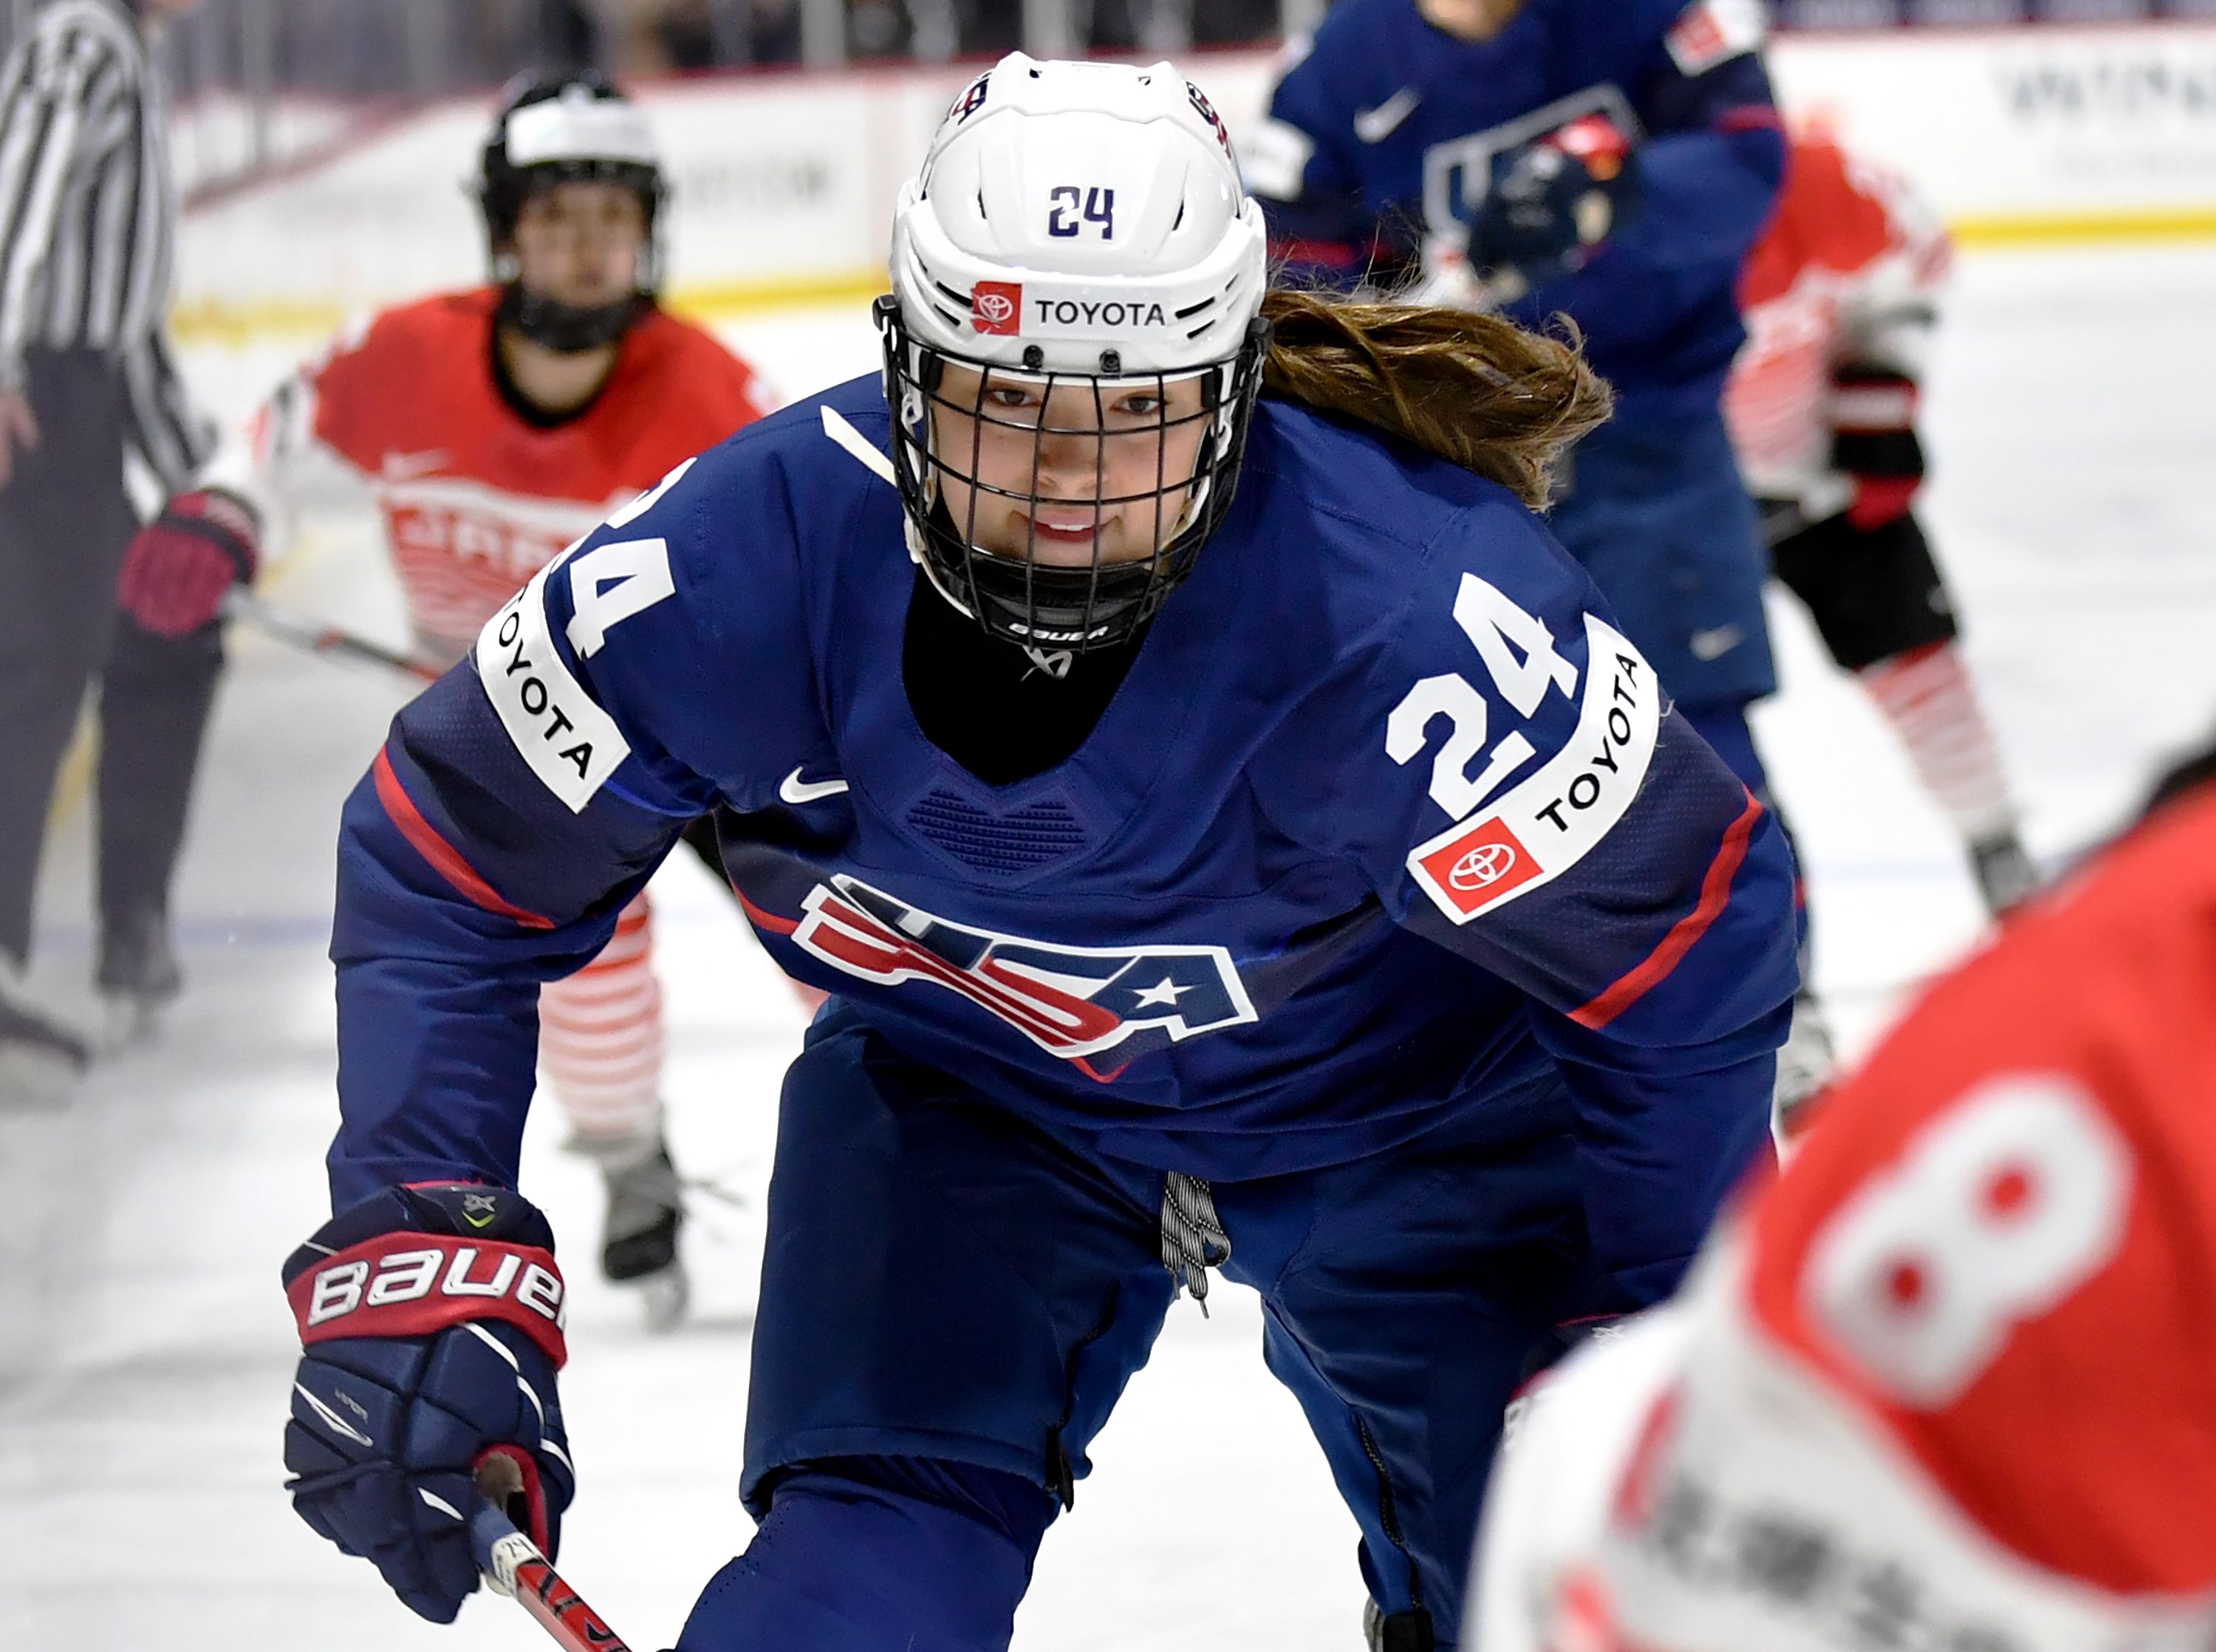 🏒 The PWHL effect on women’s hockey by the numbers